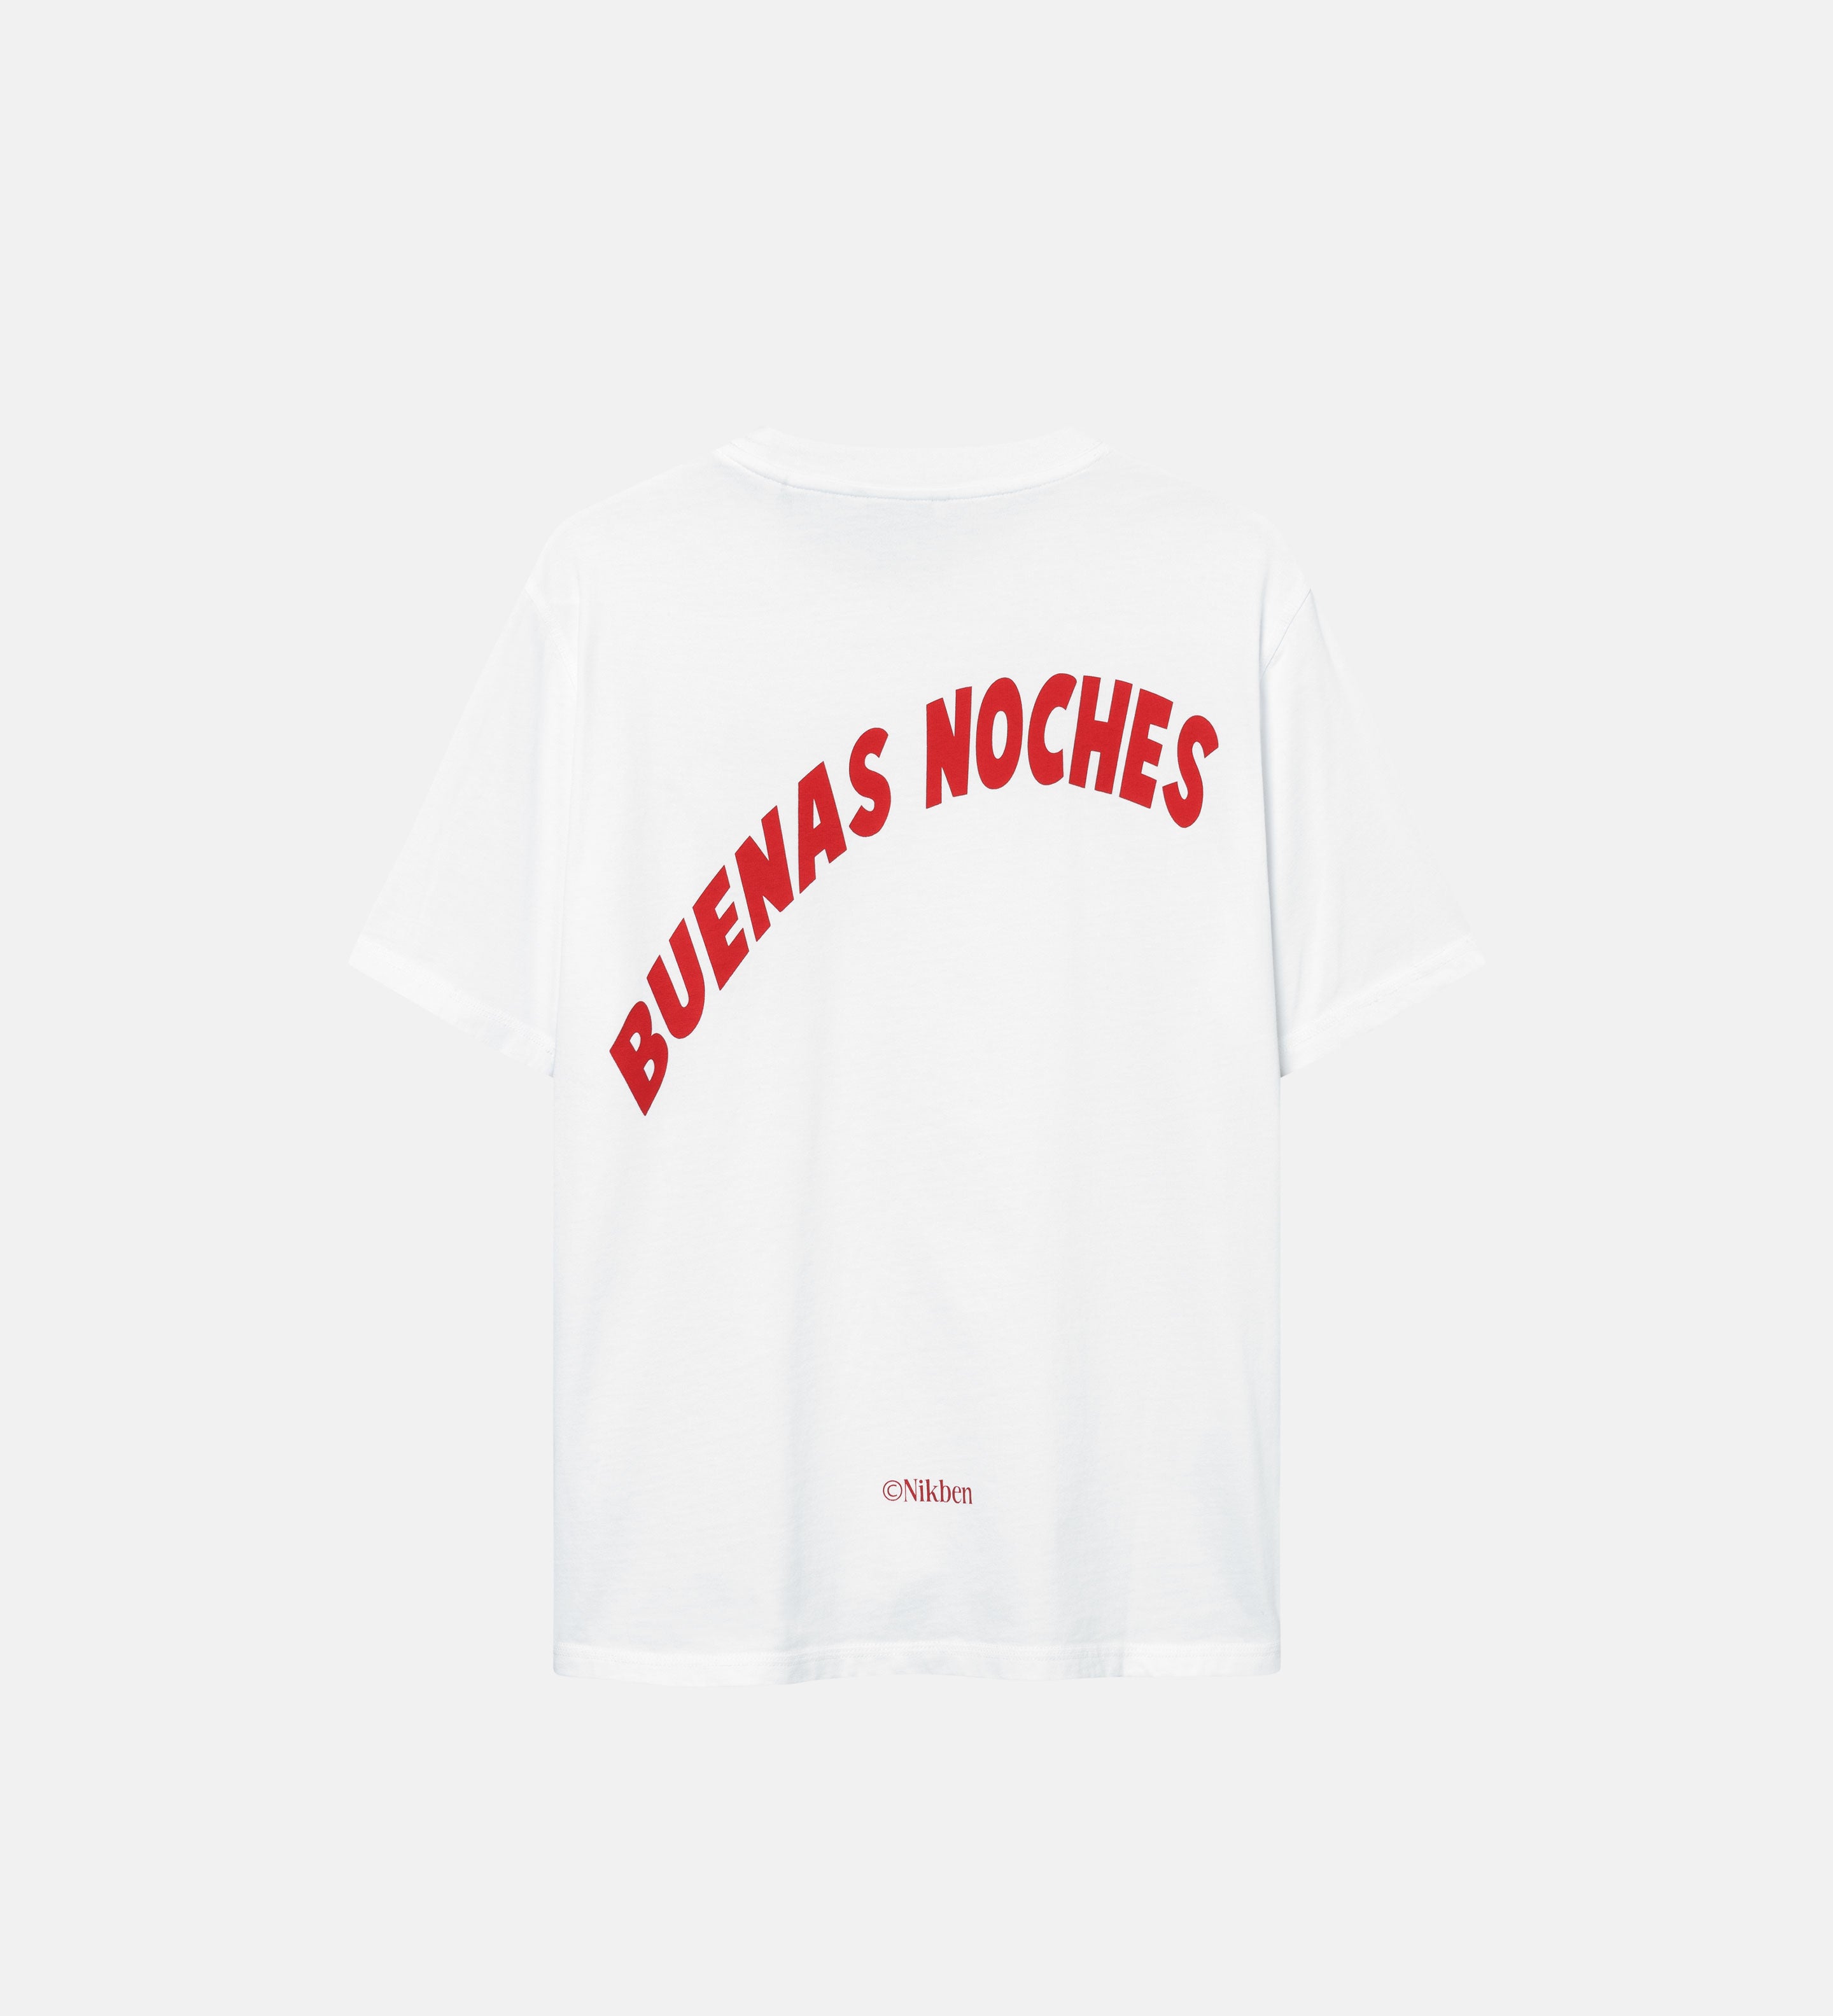 A white t-shirt with a red "Buenas Noches" text print on its back